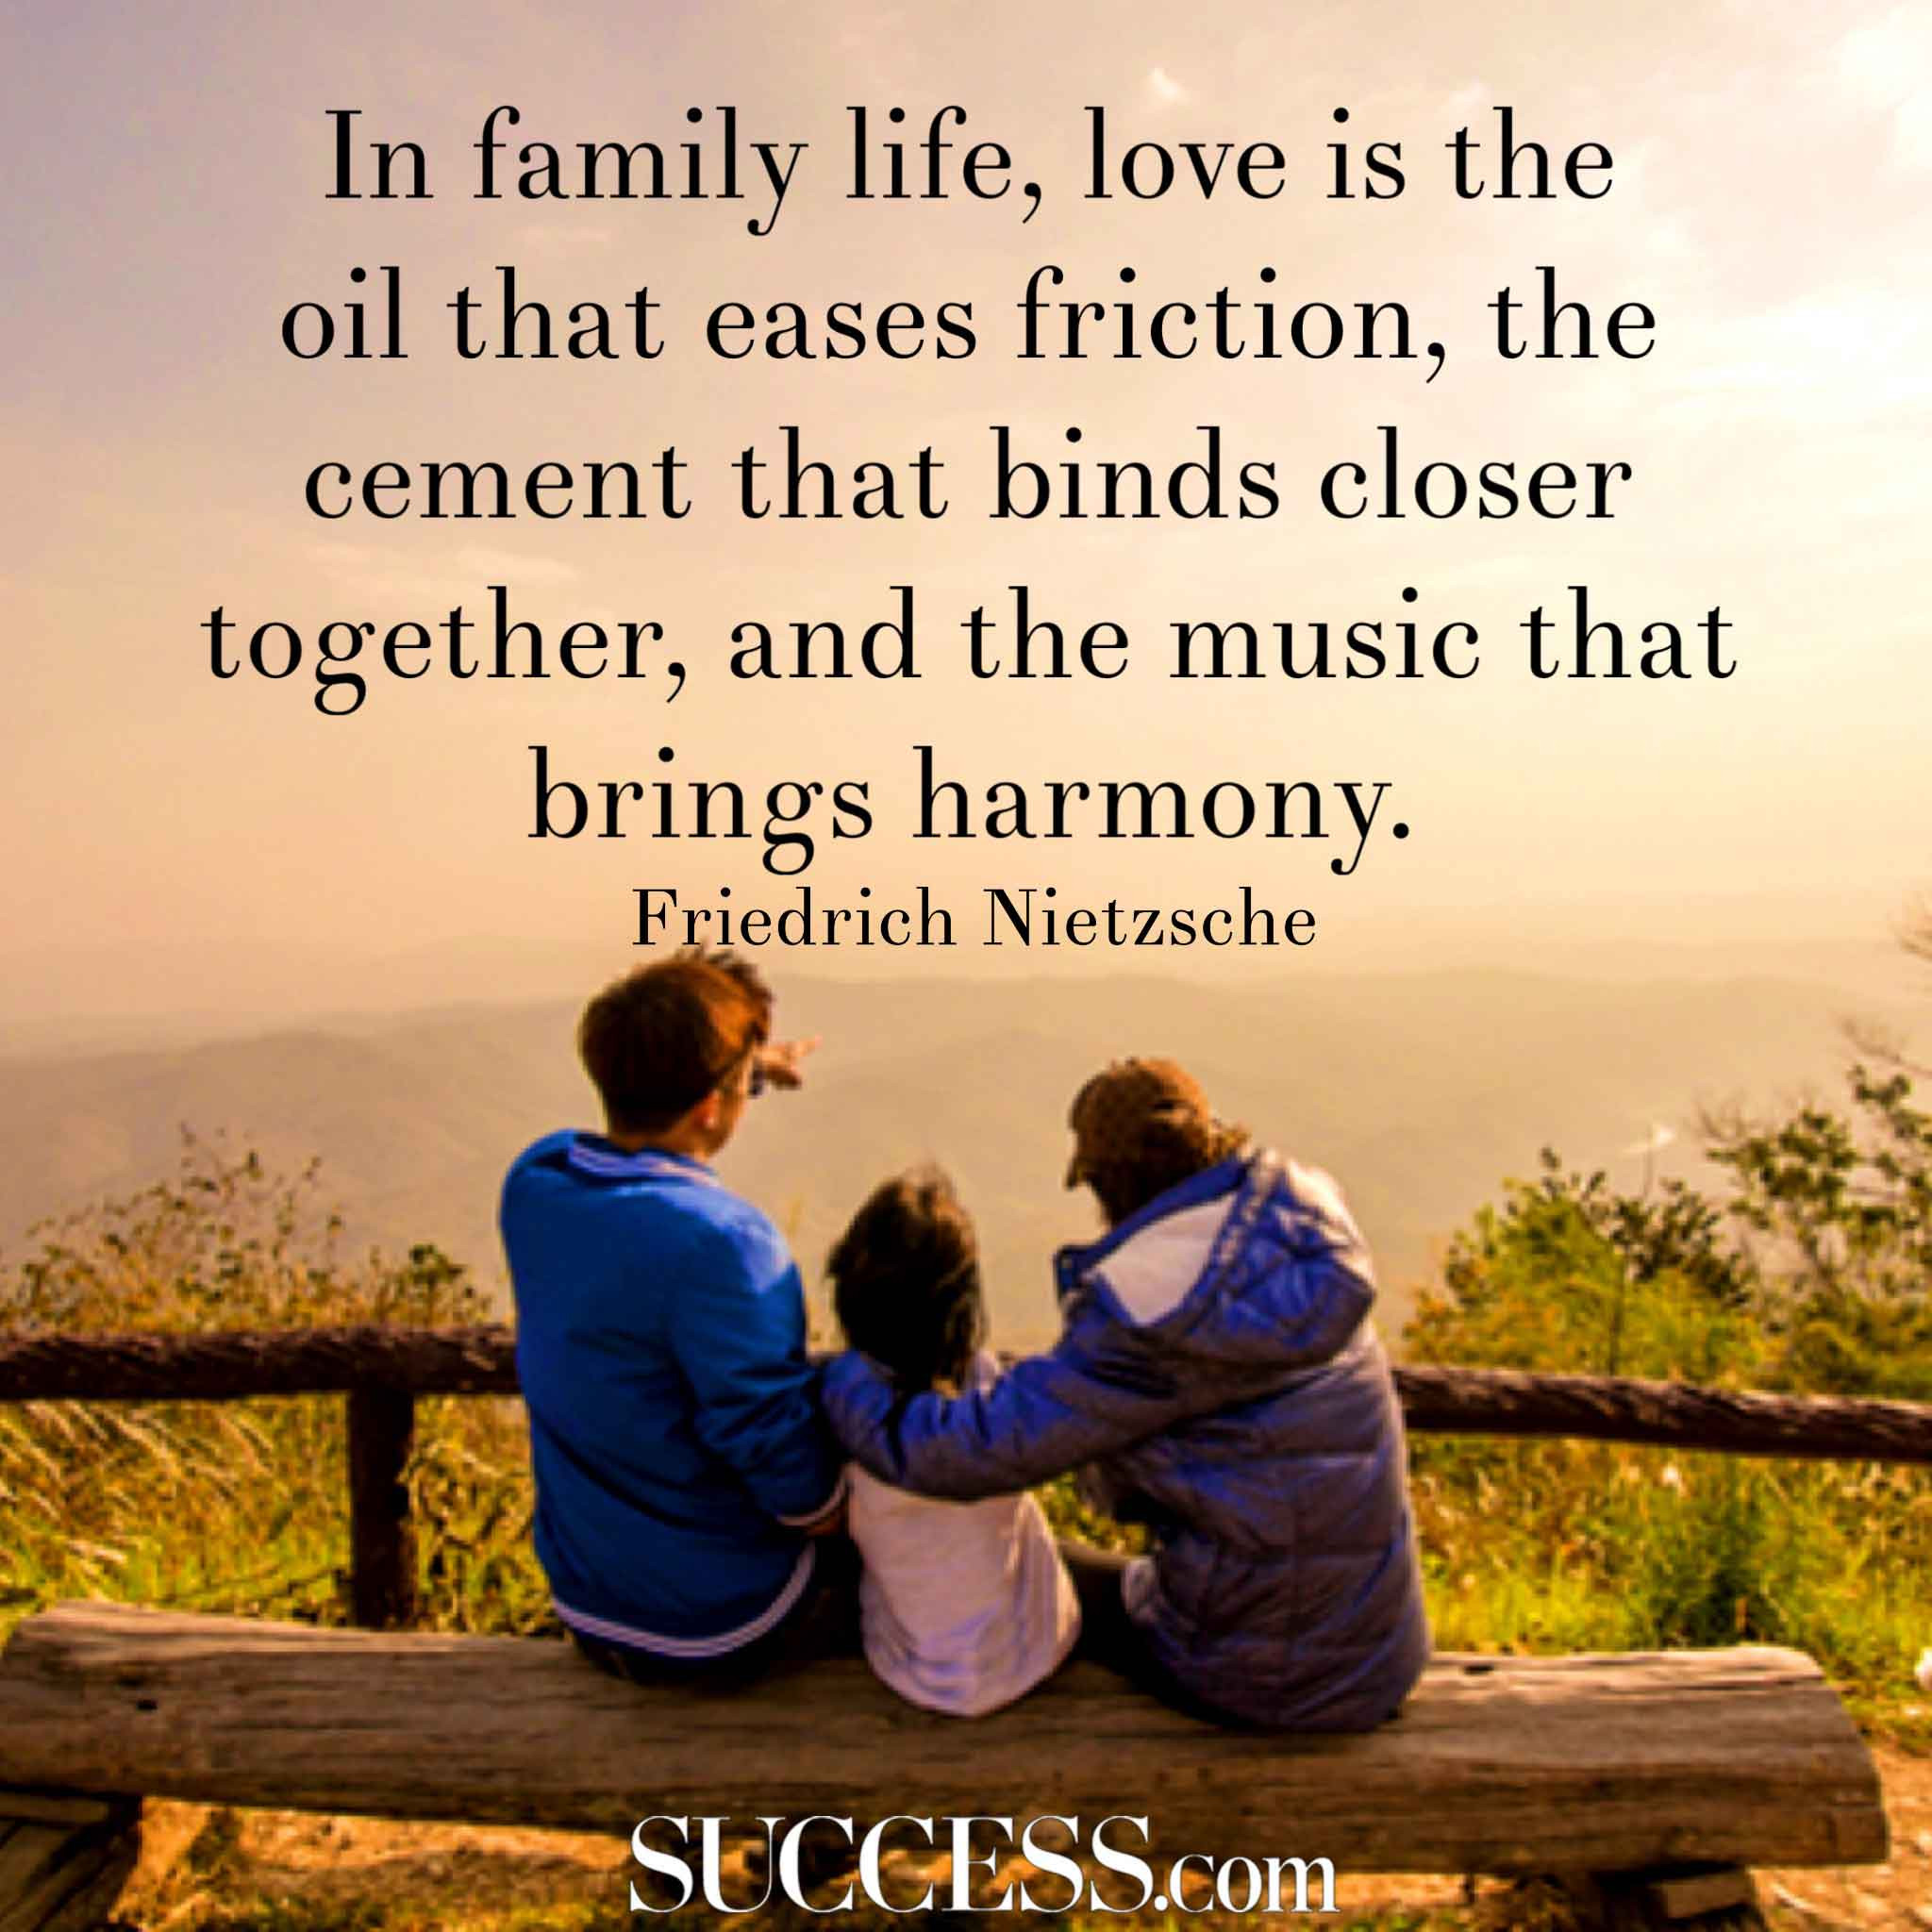 Love Of Family Quote
 14 Loving Quotes About Family